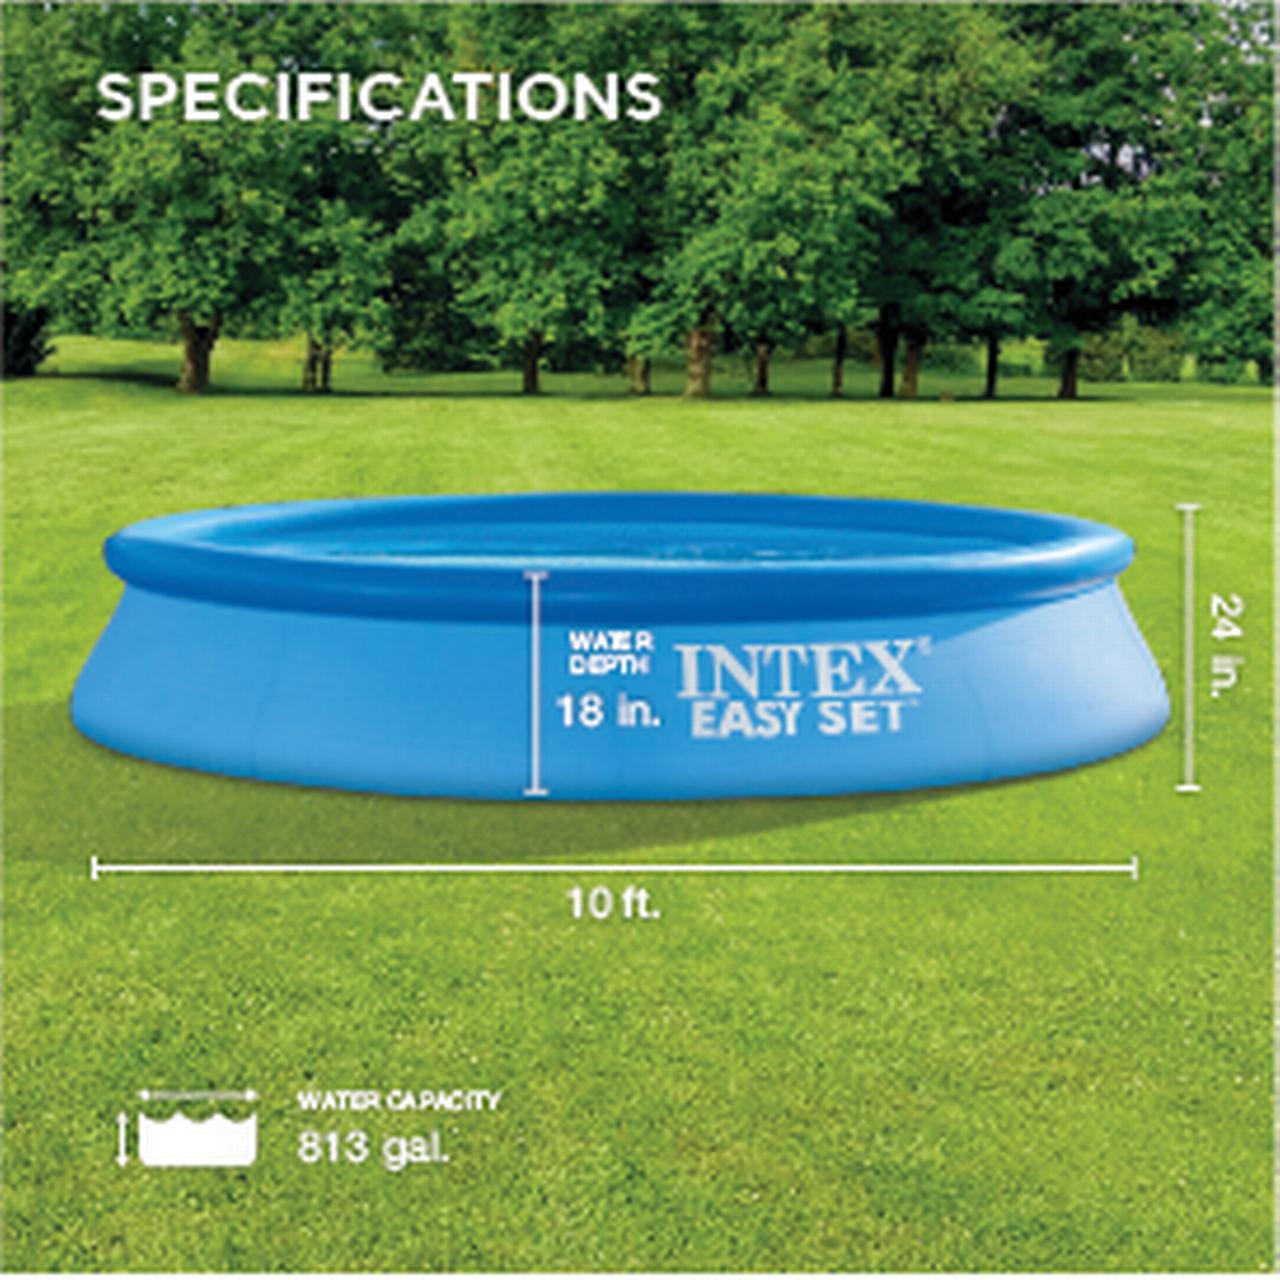 Intex 28116EH Round 10' X 2' Easy Set Inflatable Above Ground Portable Outdoor Pool for Kids and Adults, Blue - image 2 of 9